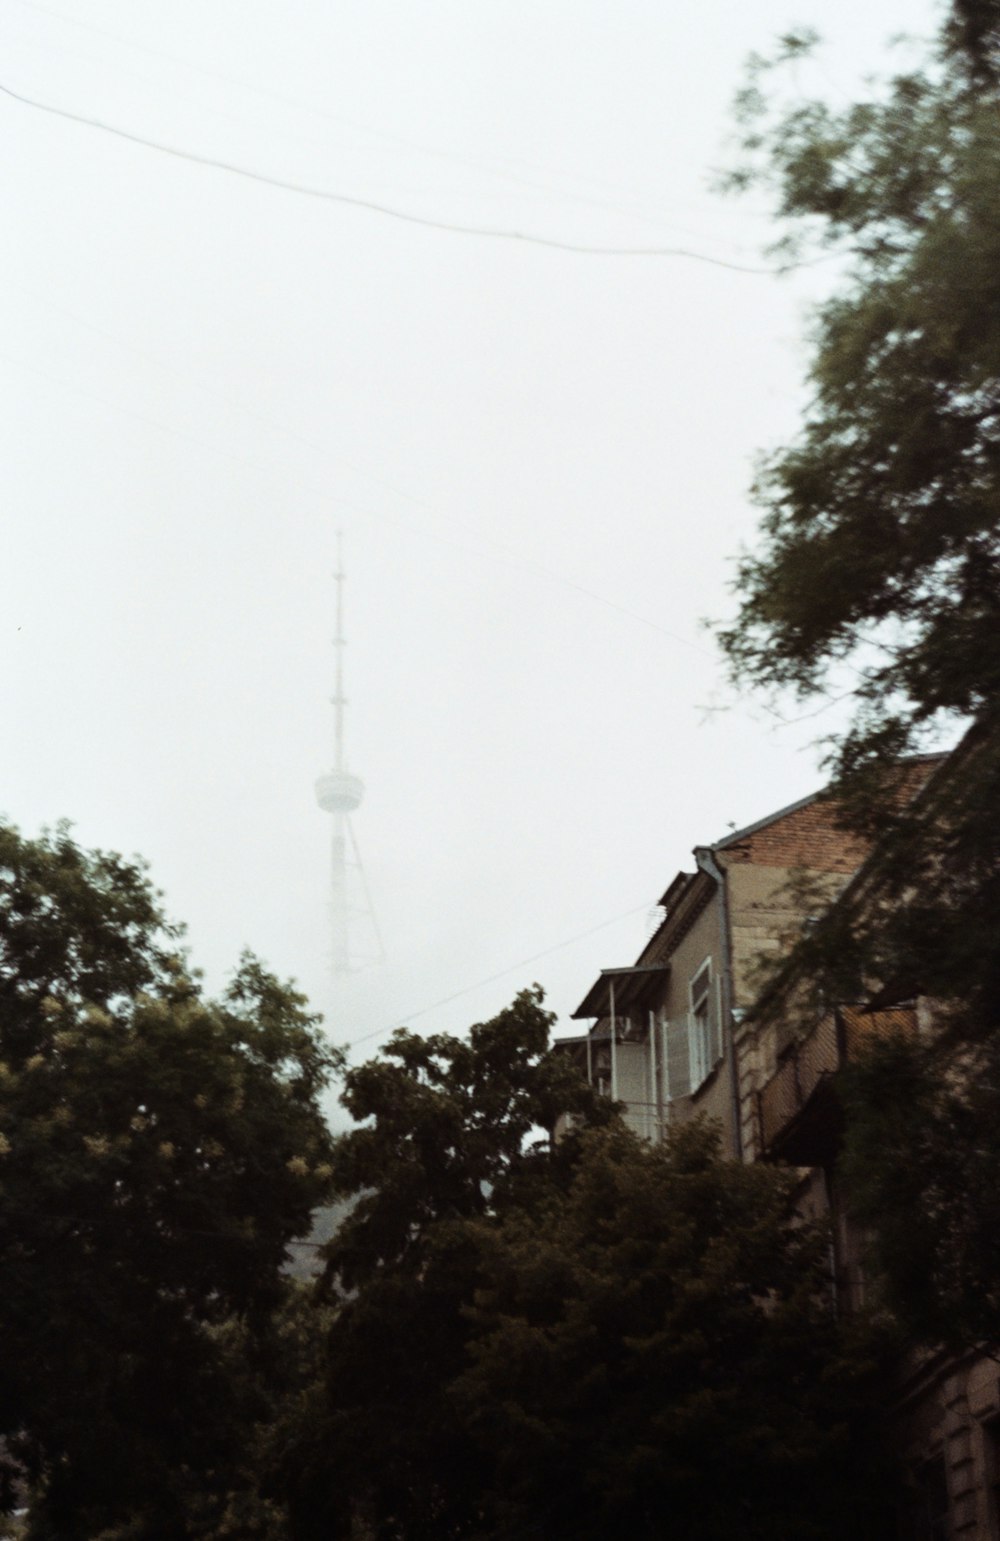 a view of a very tall tower in the distance